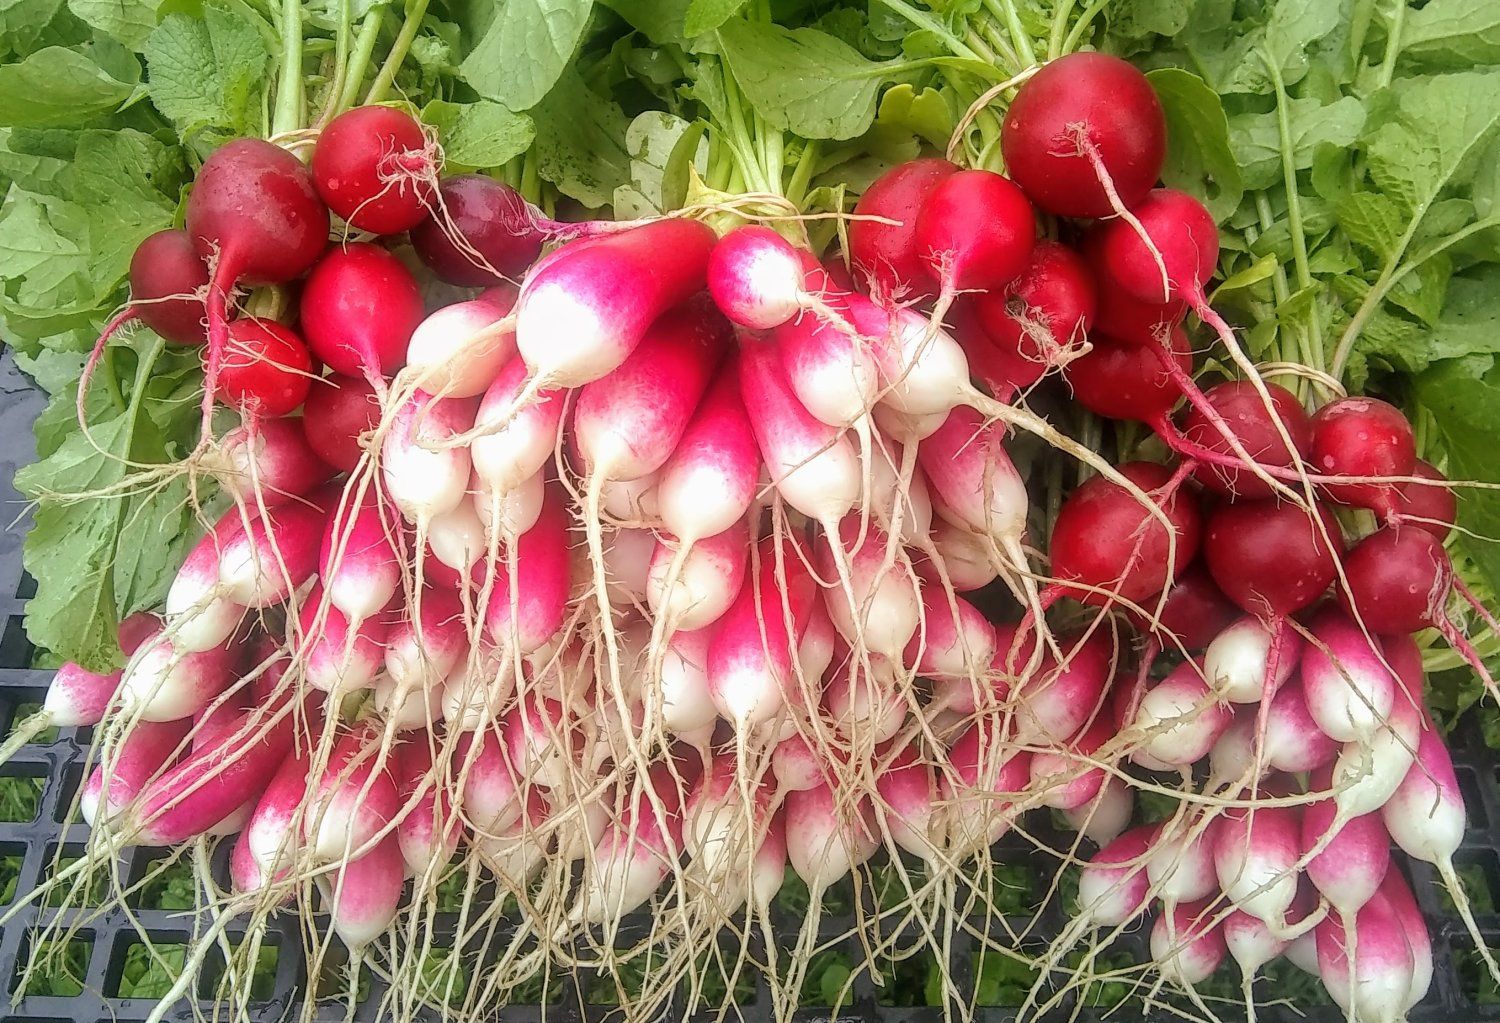 Previous Happening: Cool, Crunchy Radishes